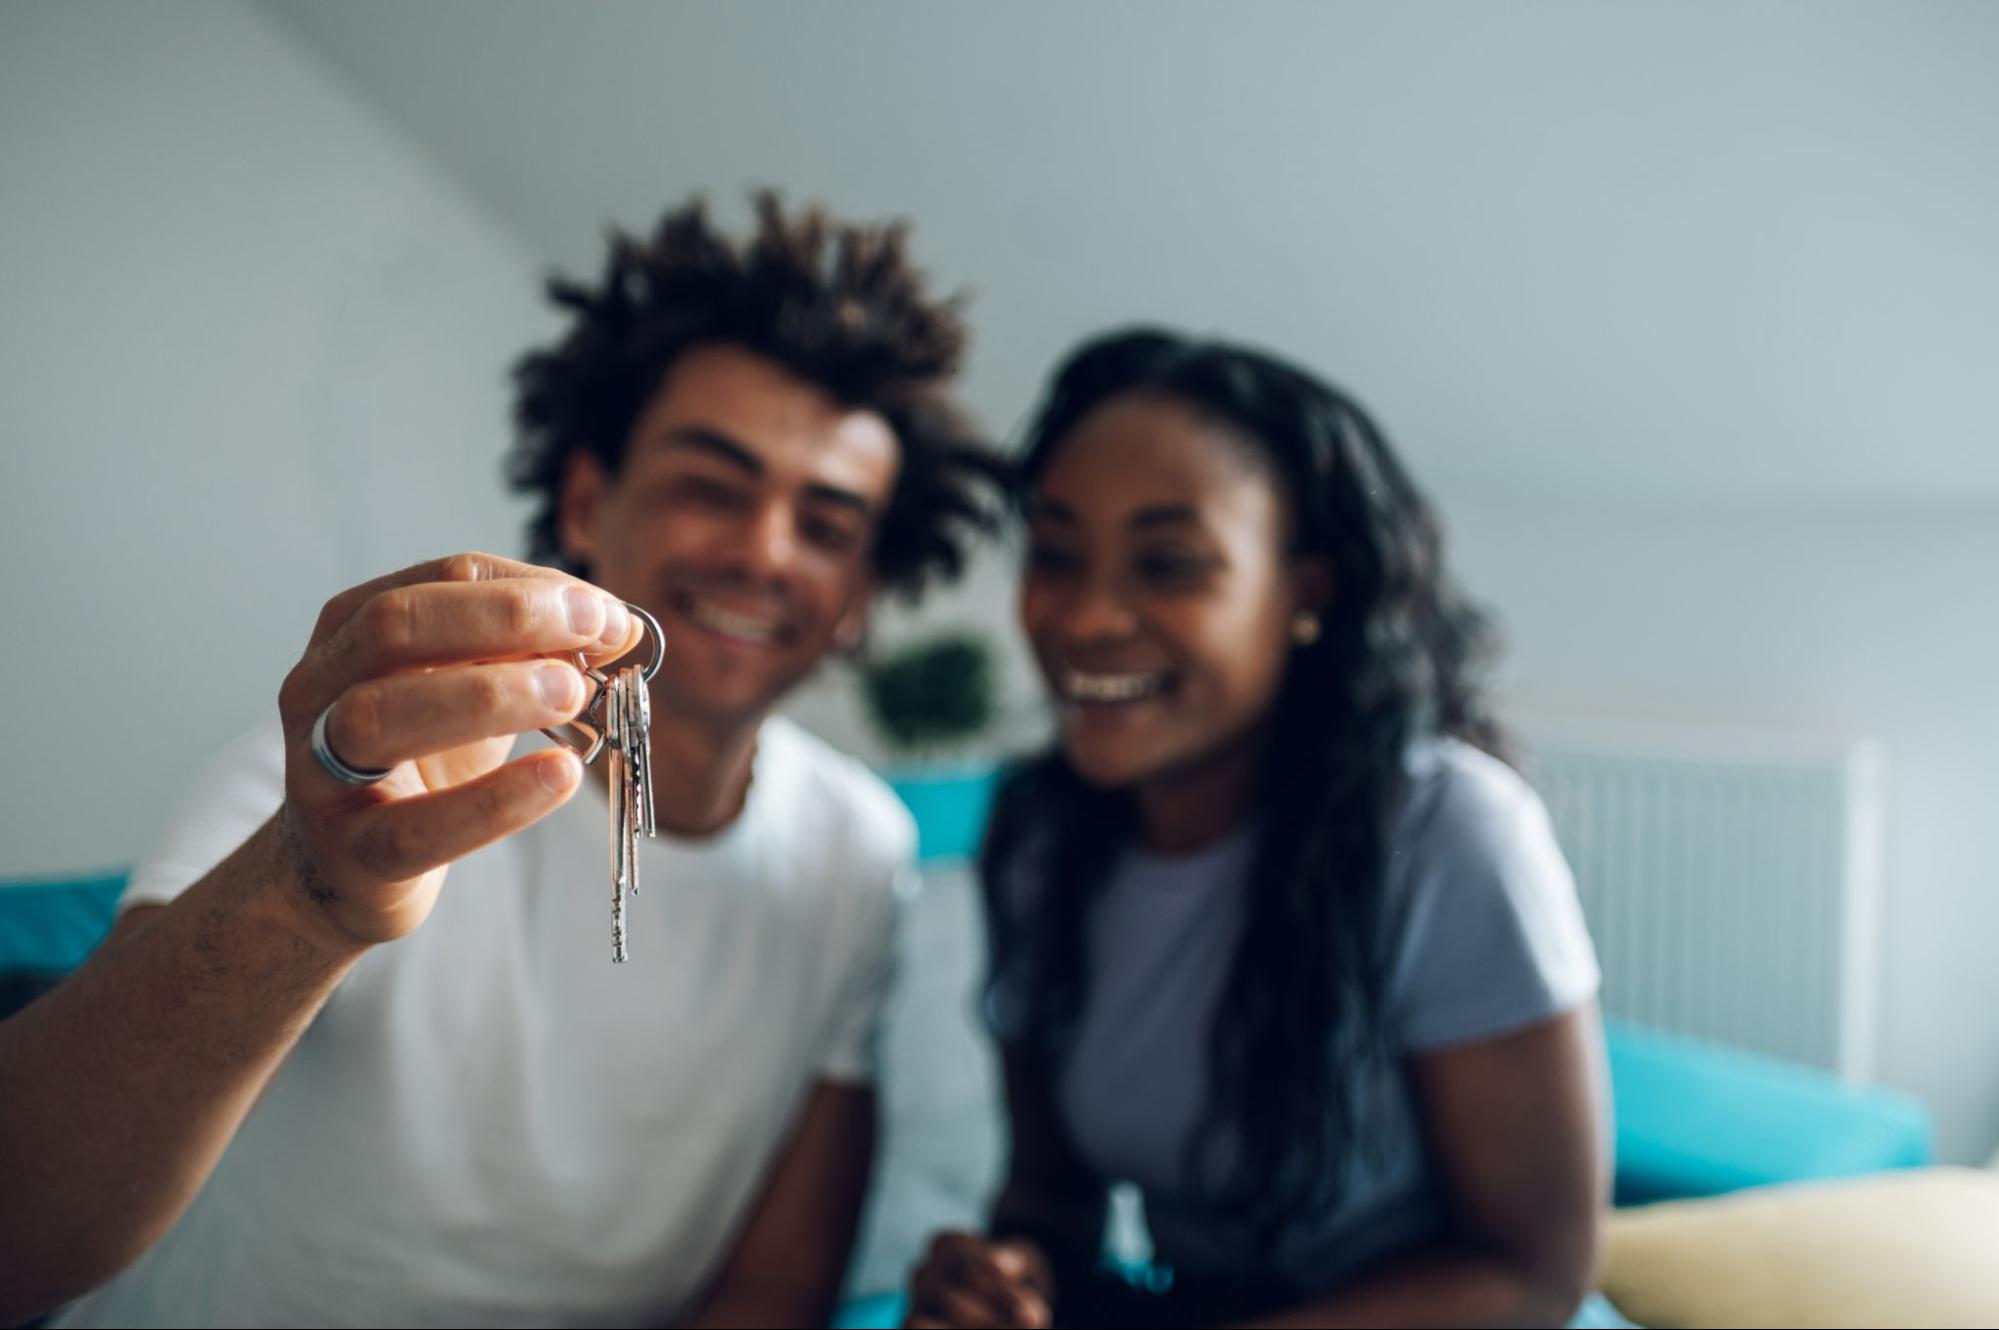 A couple holding a set of keys in focus.